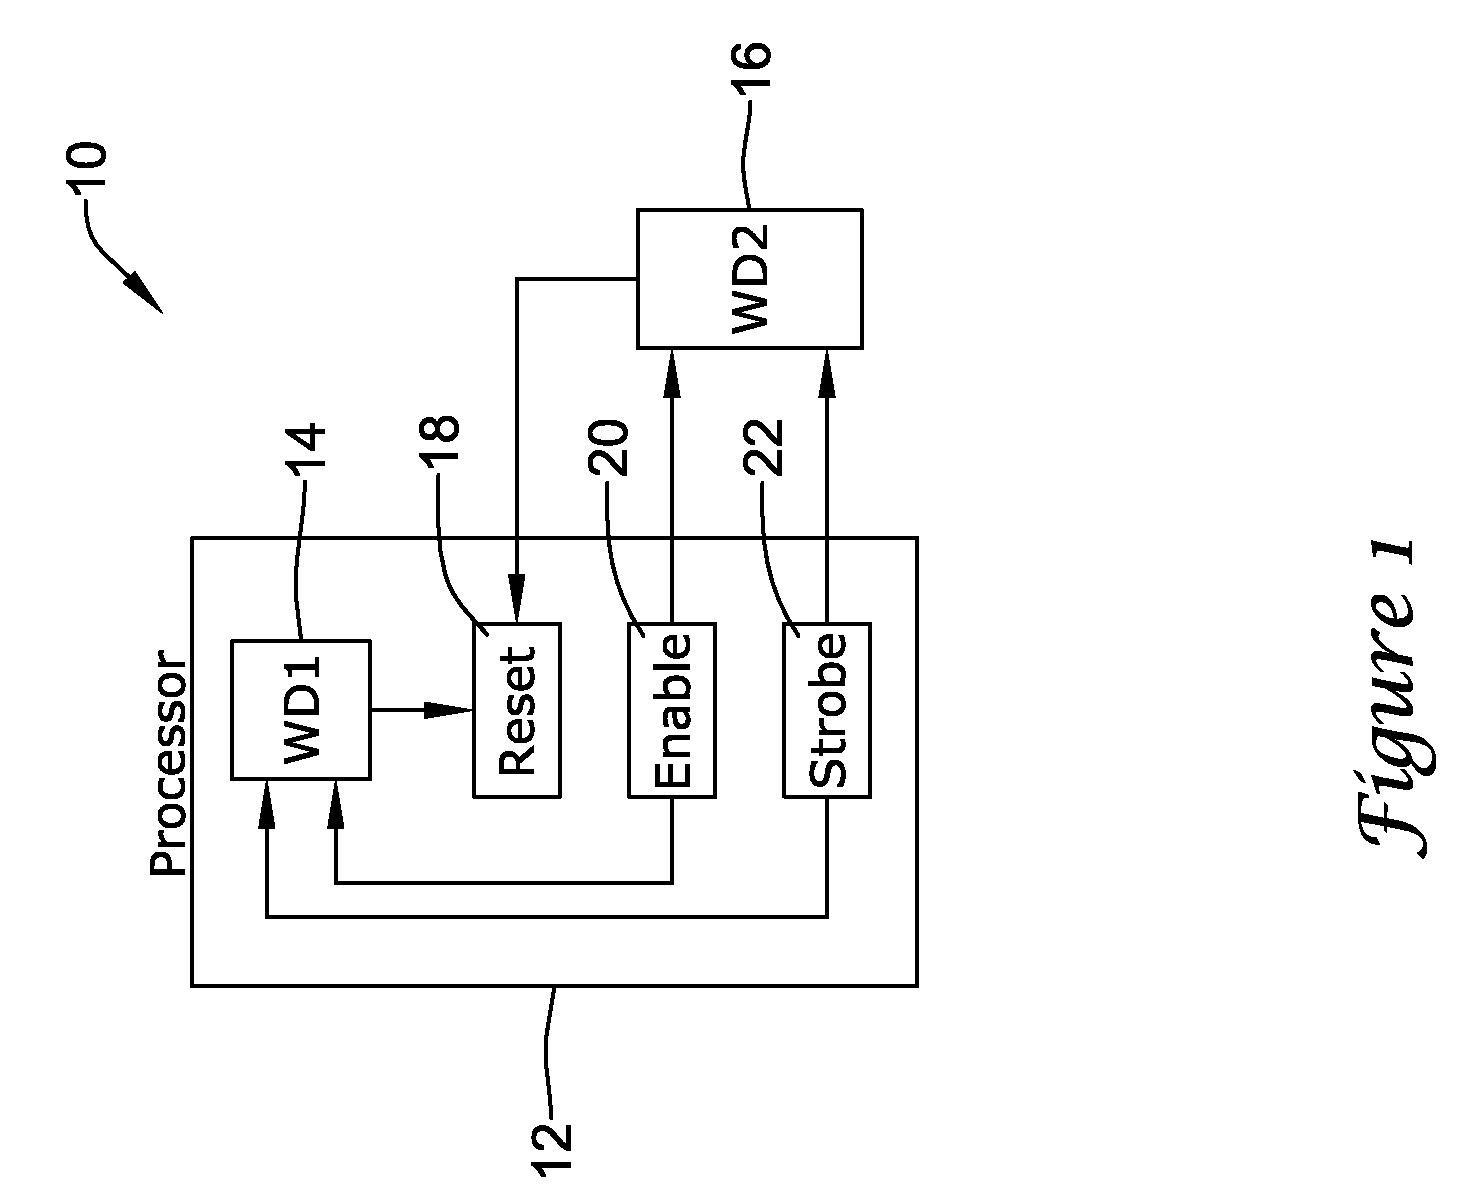 Microprocessor supervision in a special purpose computer system